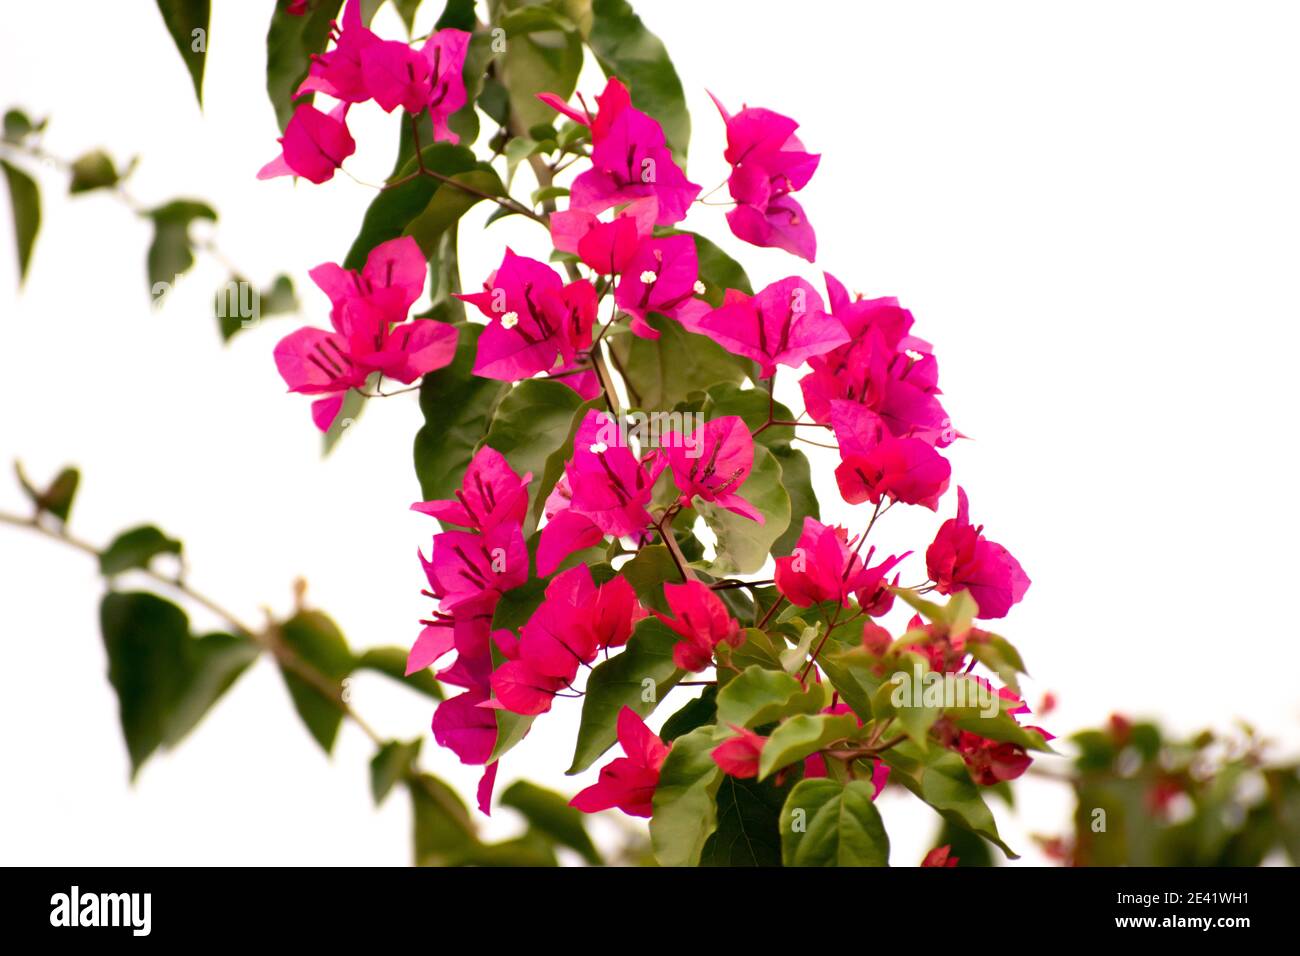 Bougainvillea is a genus of thorny ornamental vines, bushes, or trees. Stock Photo